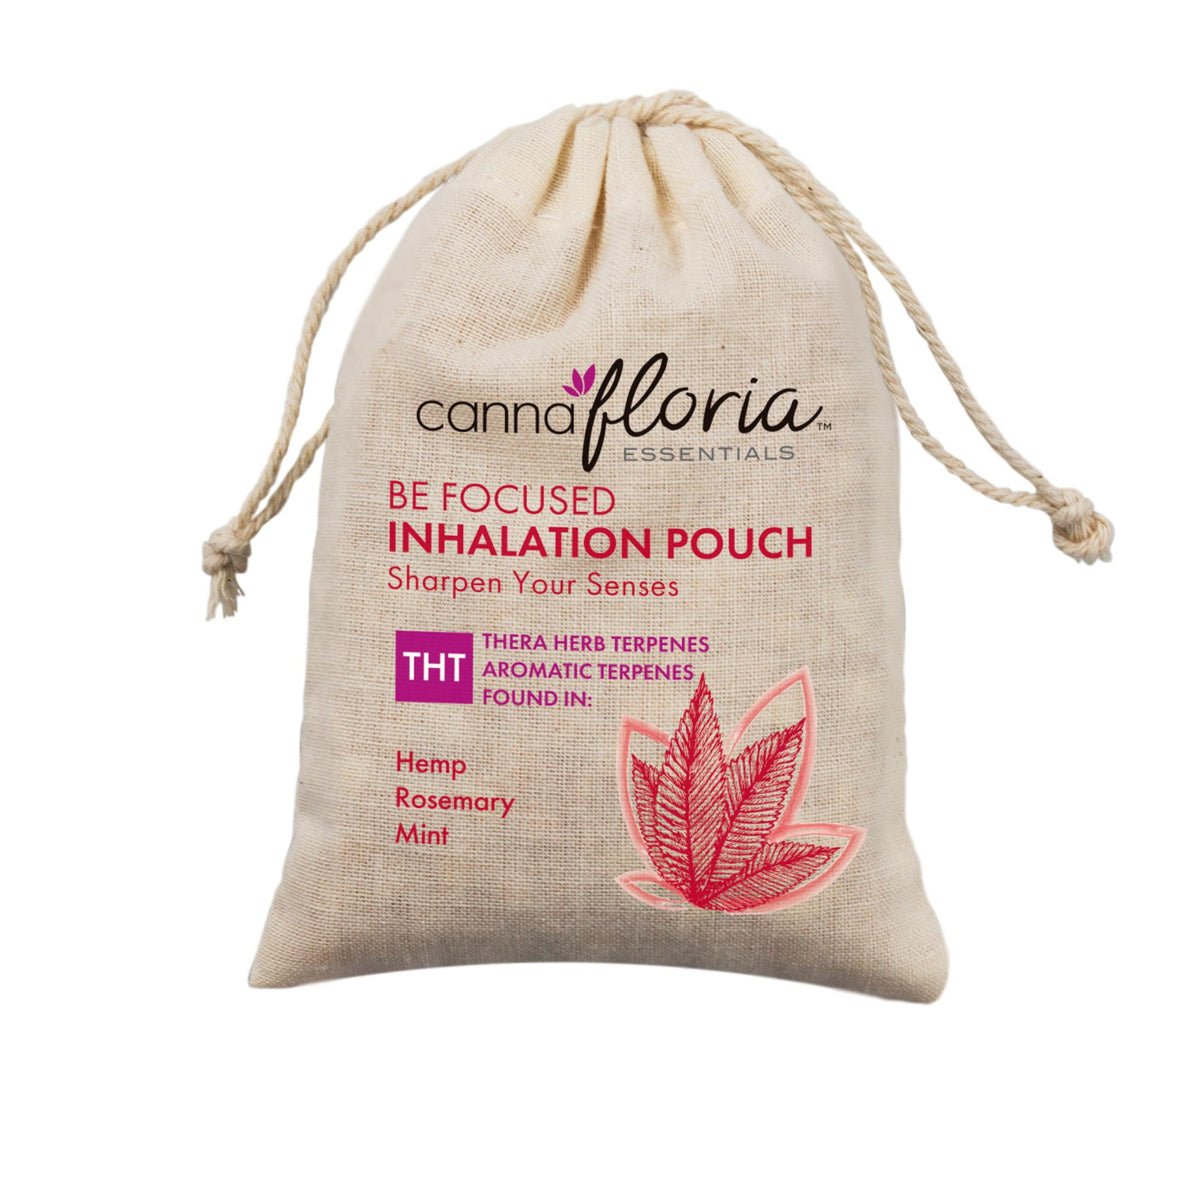 Cannafloria Inhalation Pouch, Be Focused, 2 Pack